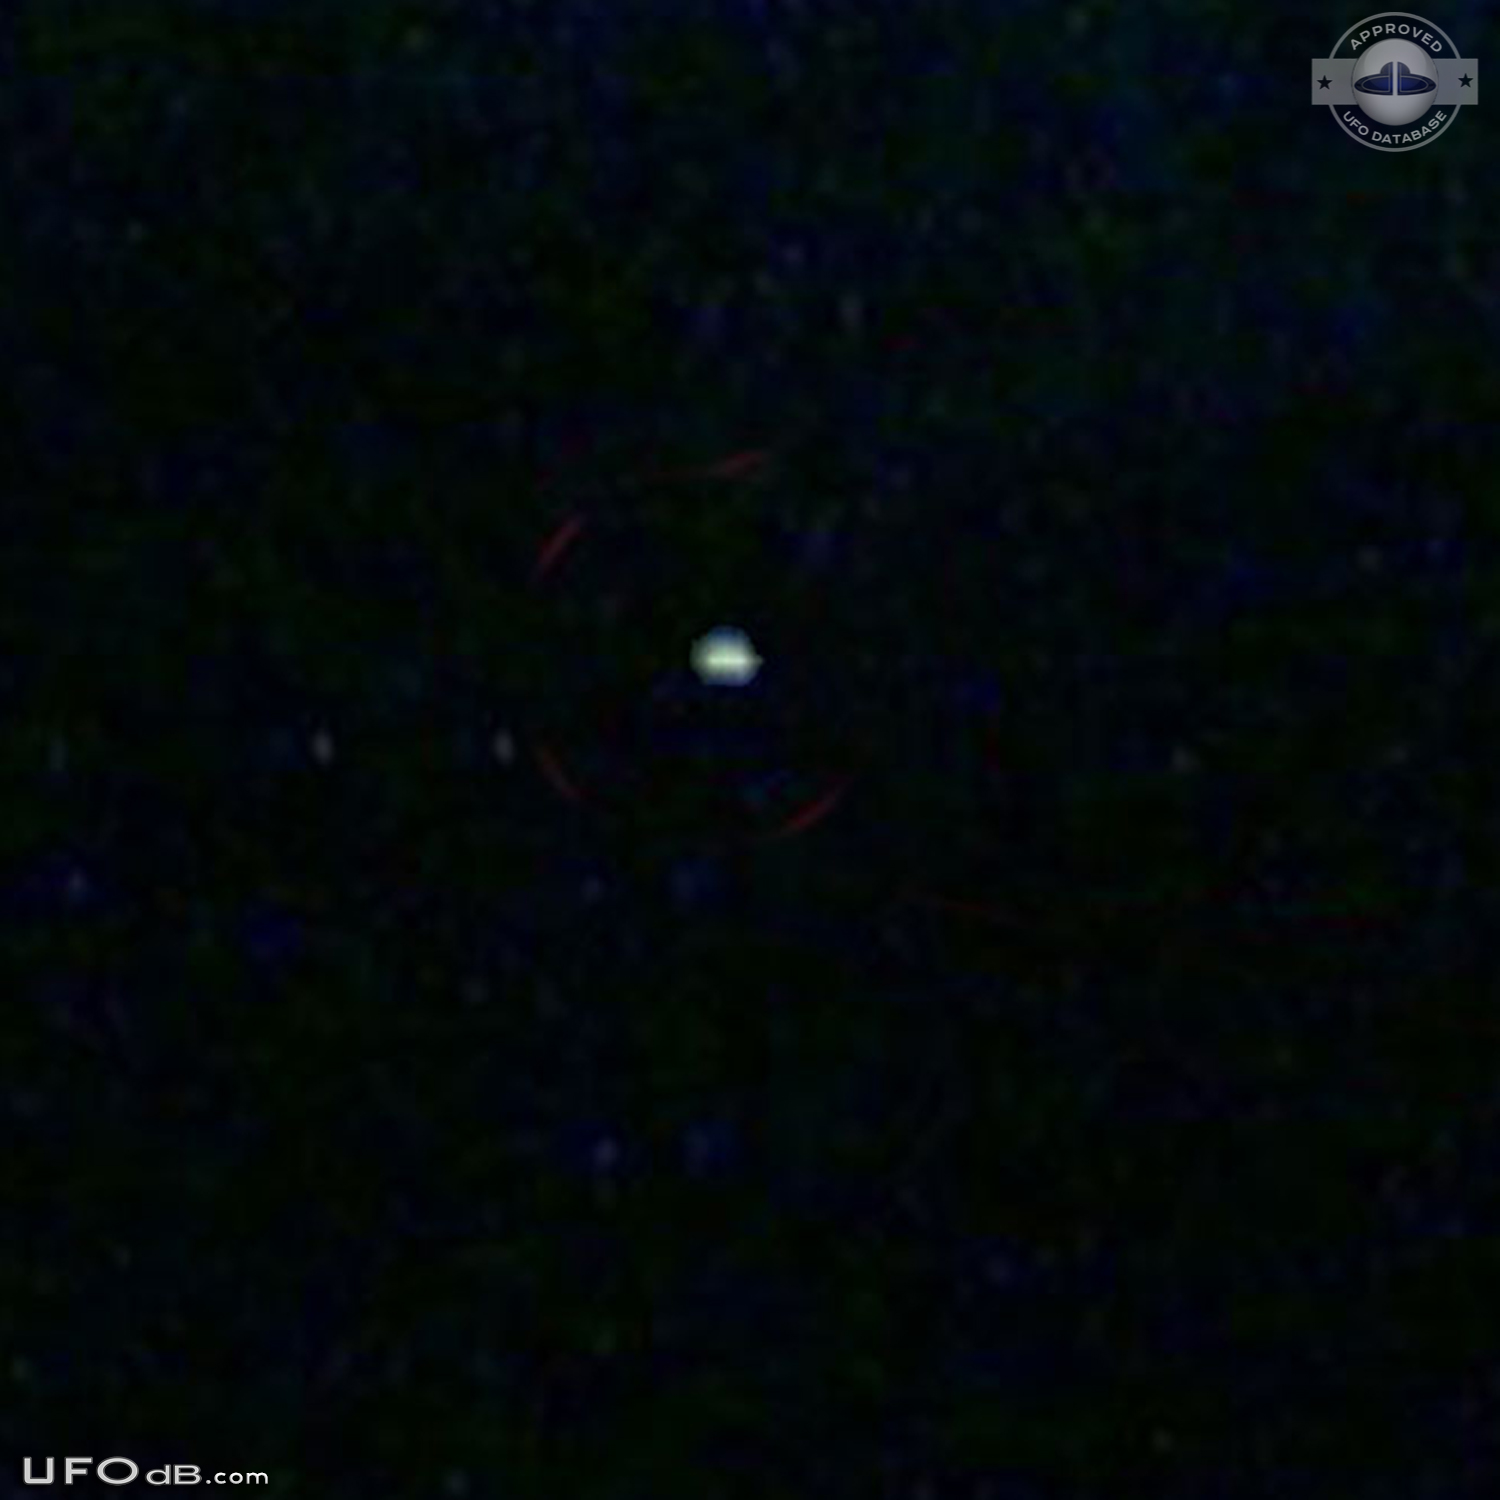 UFO was there for two hours over Barrie Ontario Canada in 2007 UFO Picture #646-2